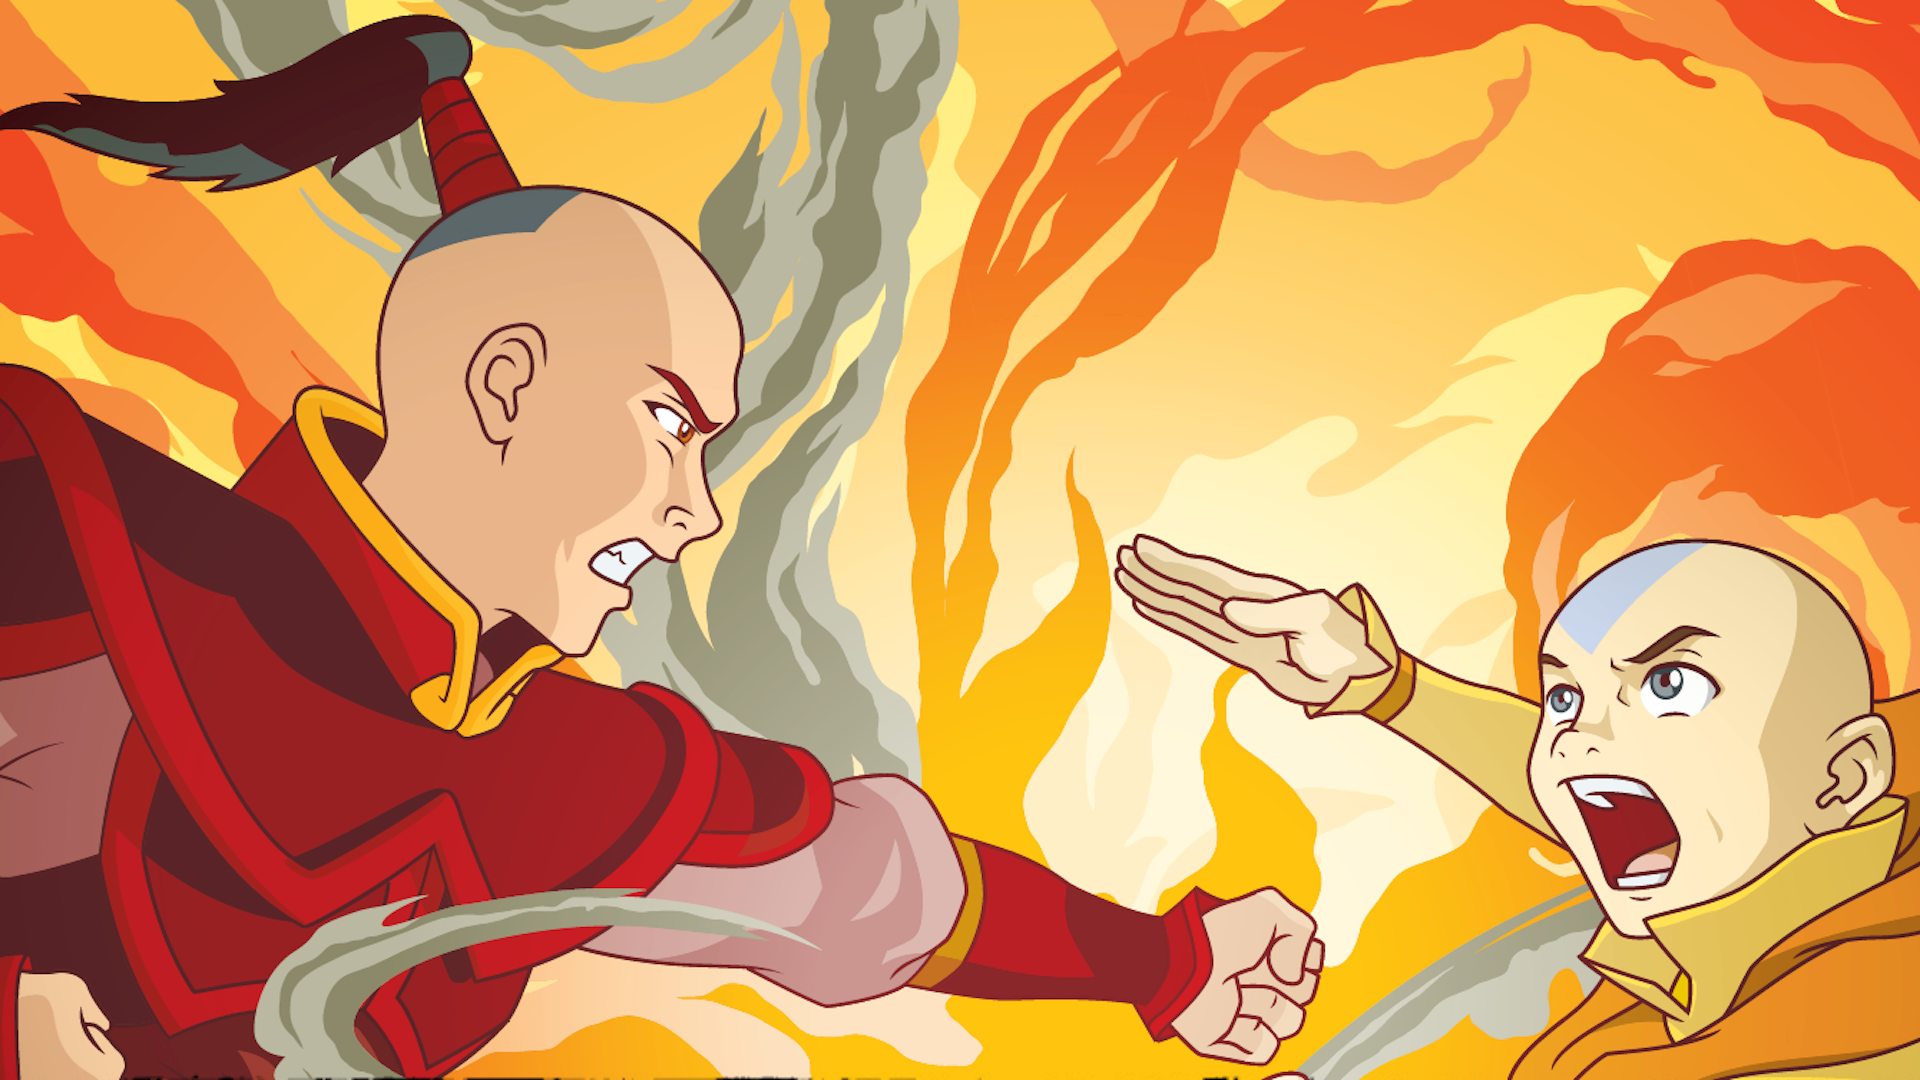 Upcoming Avatar RPG will let you roleplay being a bender in The Last  Airbender and The Legend of Korra eras